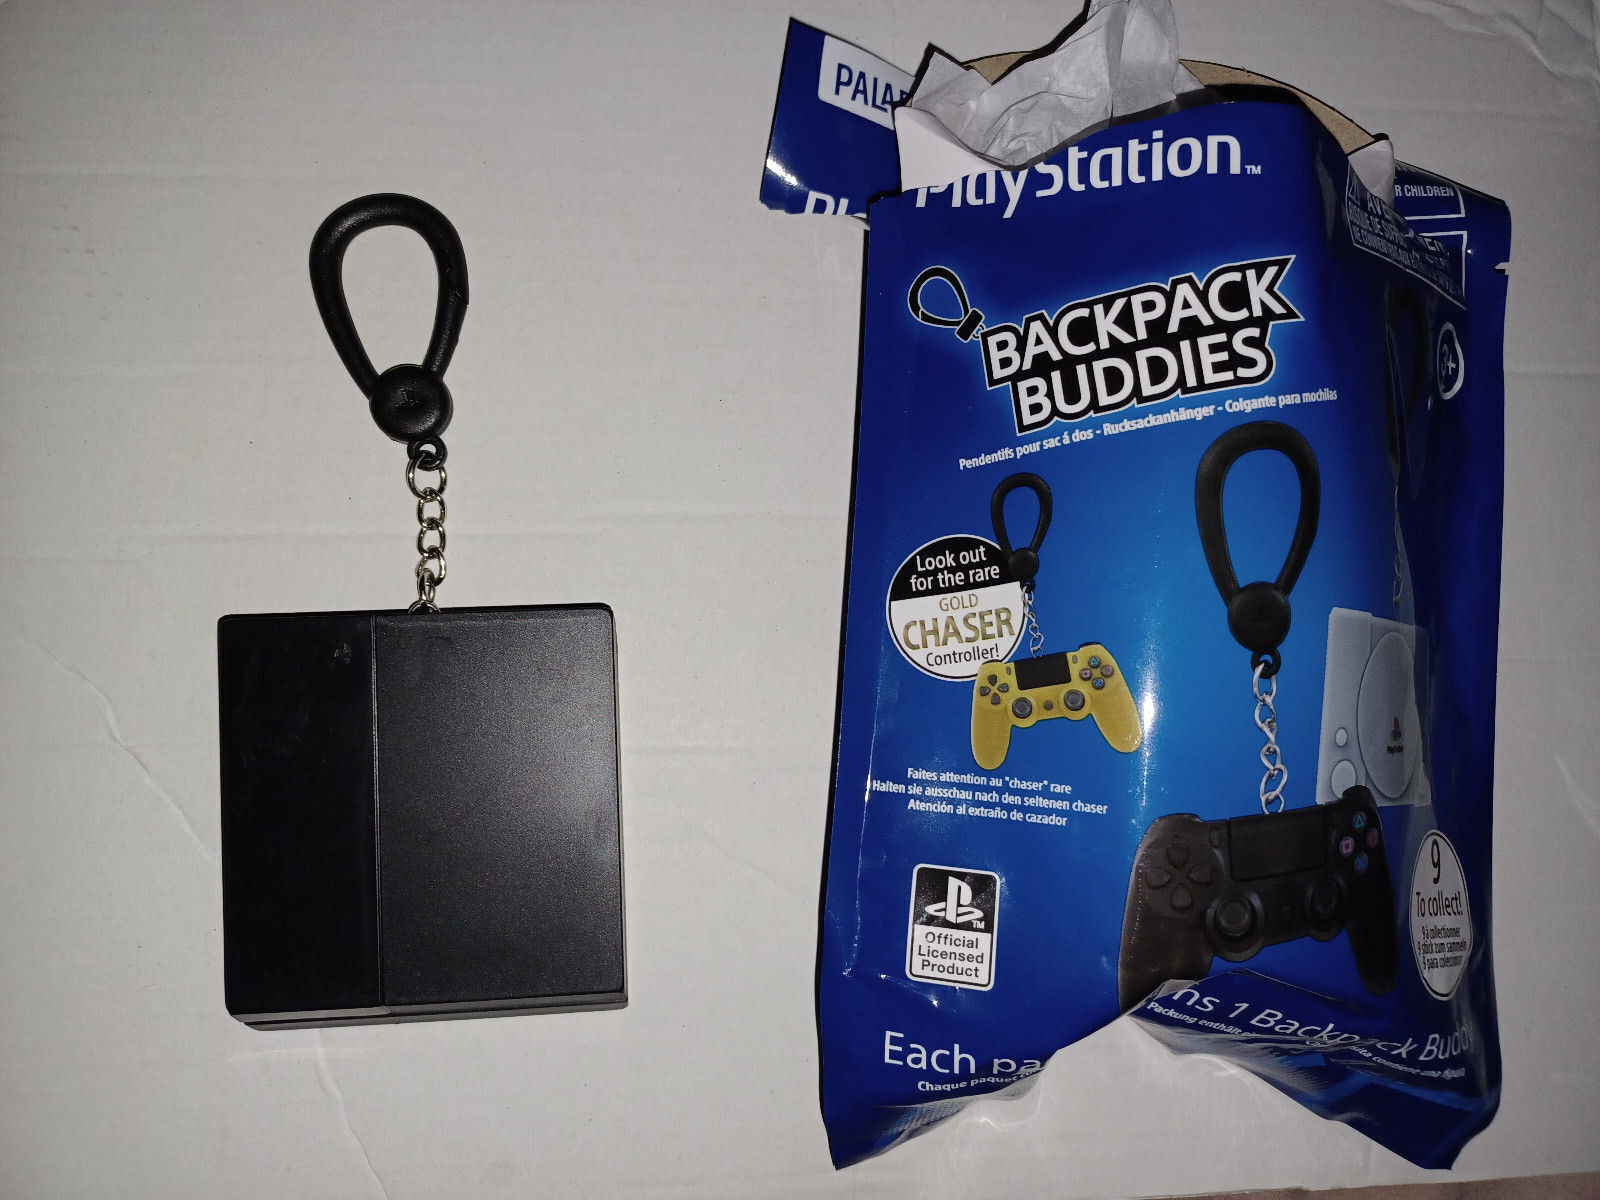 NEW Paladone Playstation Backpack Buddies - Sony Playstation 4 Console Keychain